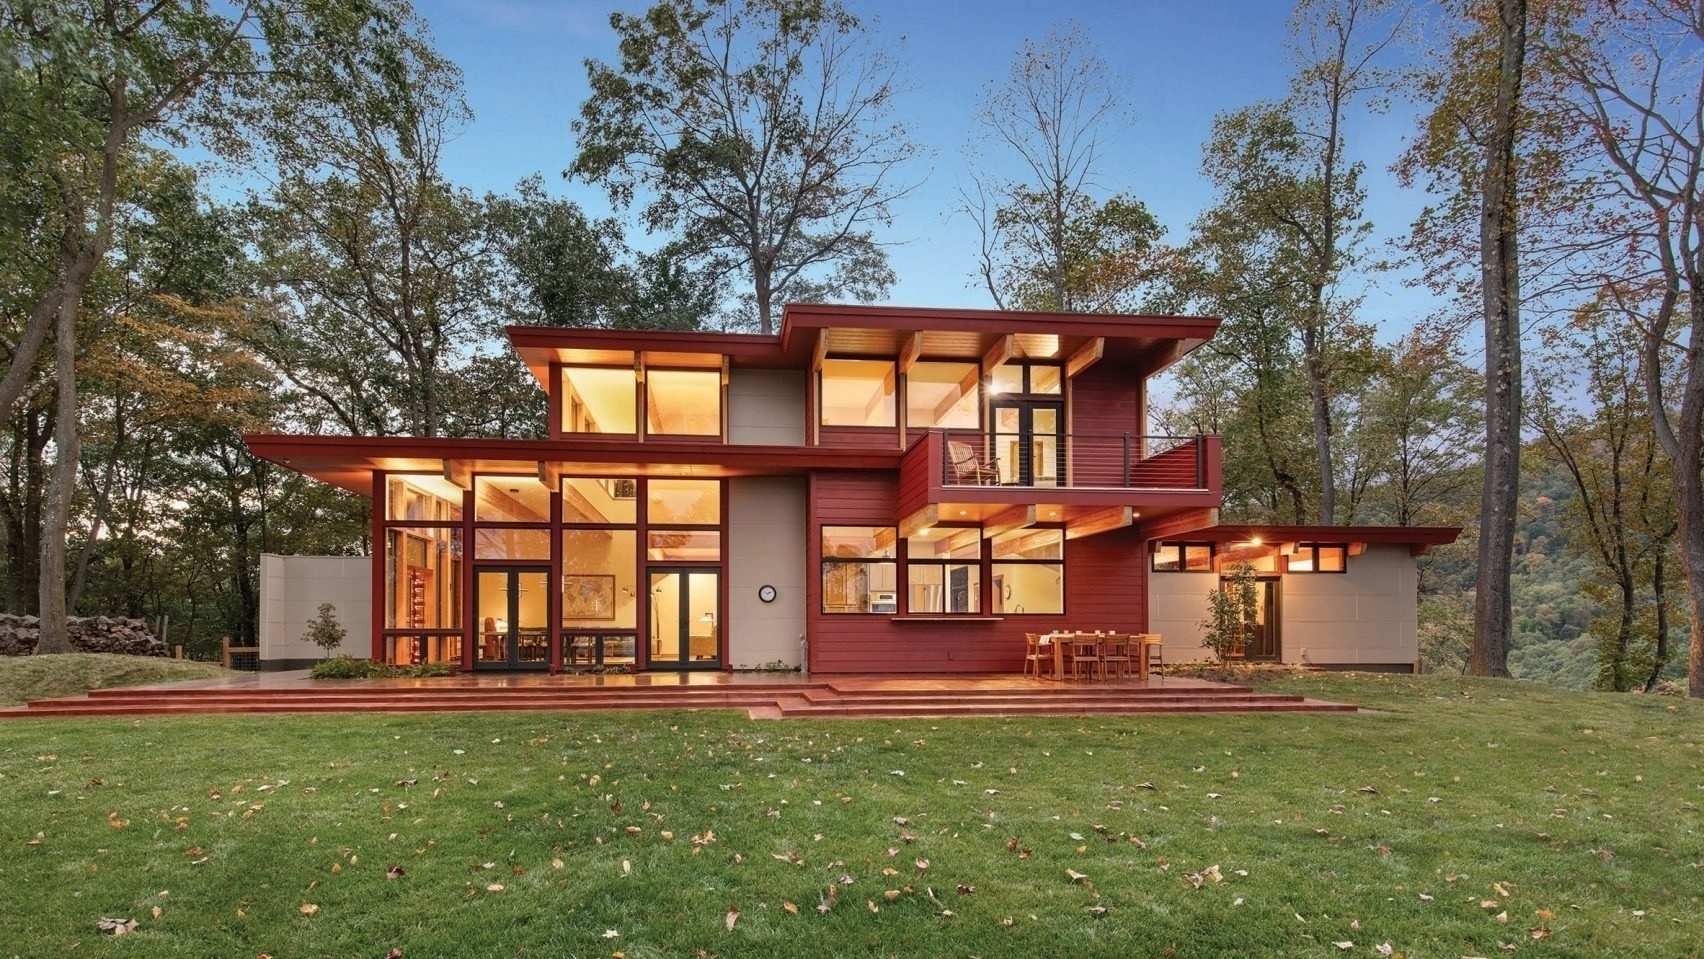 A modern, two-story house with large windows is situated in a lush, wooded area.